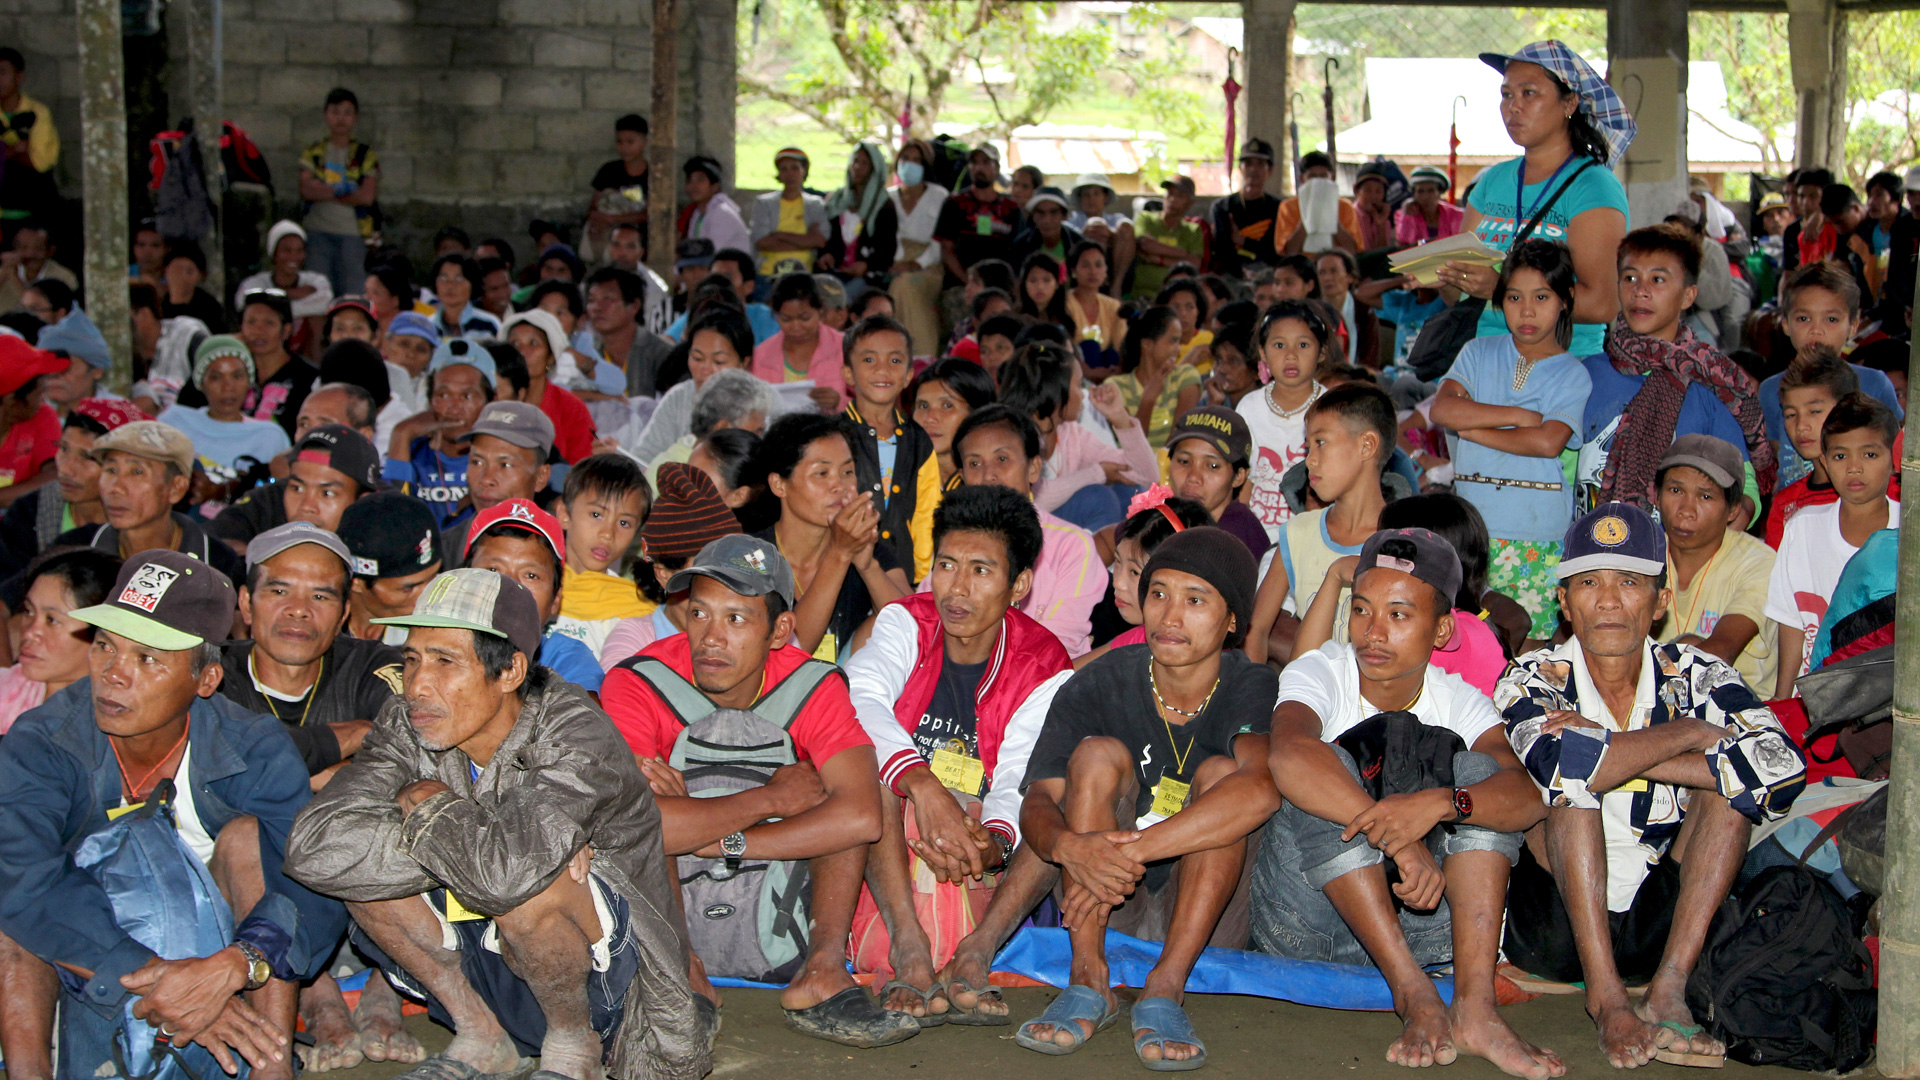 Tumandok: A People’s Struggle for Land, Water and Life